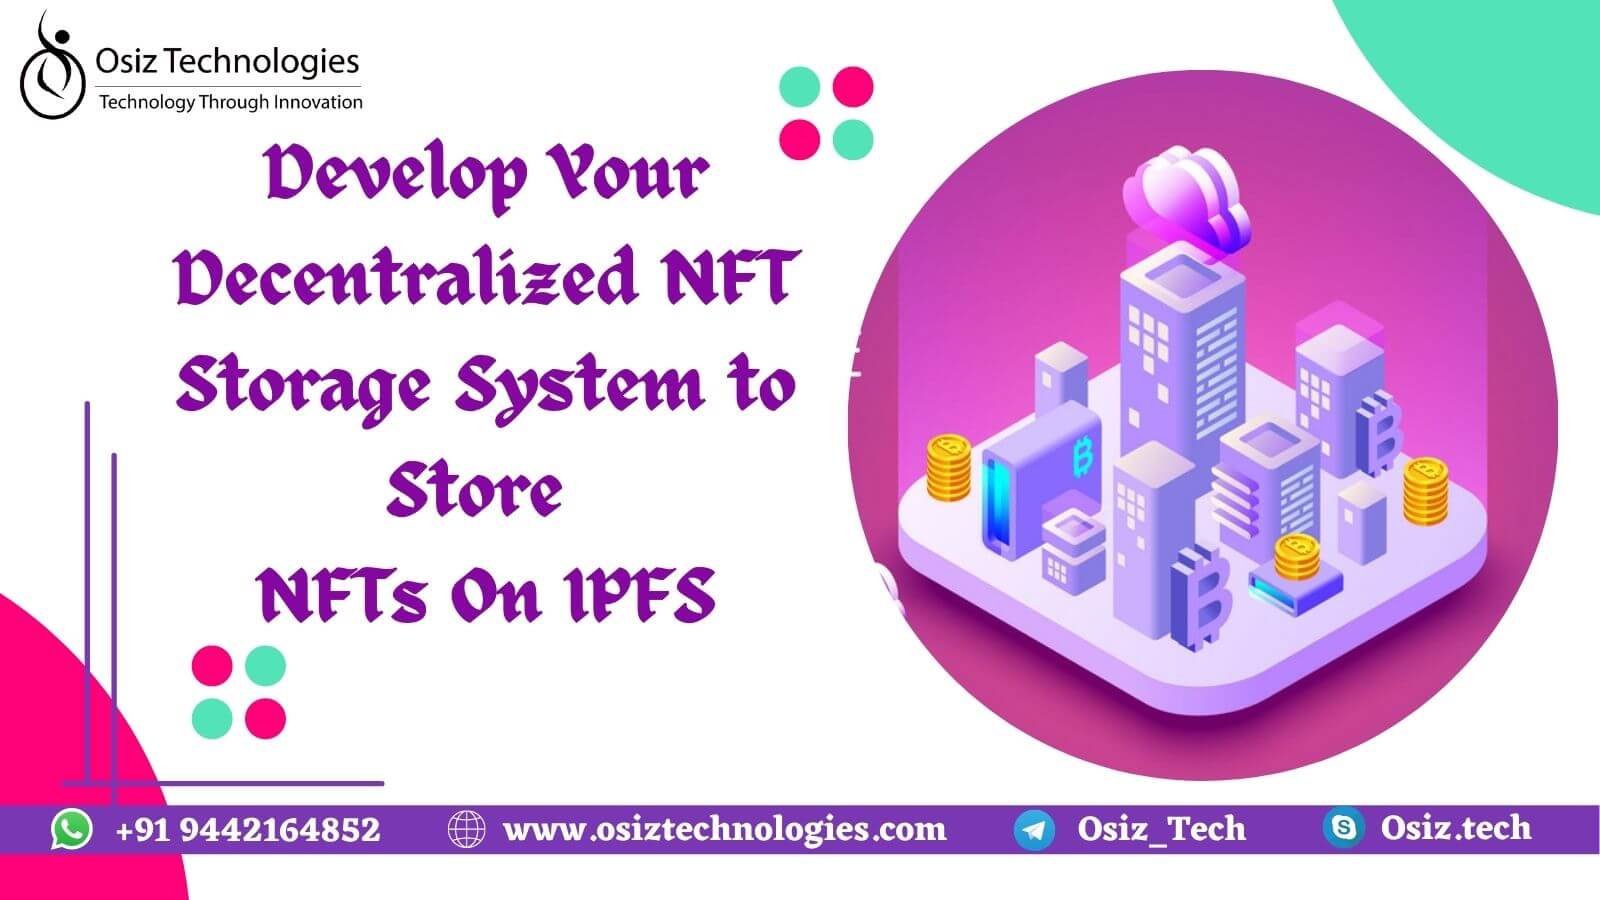 Develop Your Decentralized NFT Storage System to Store NFTs On IPFS